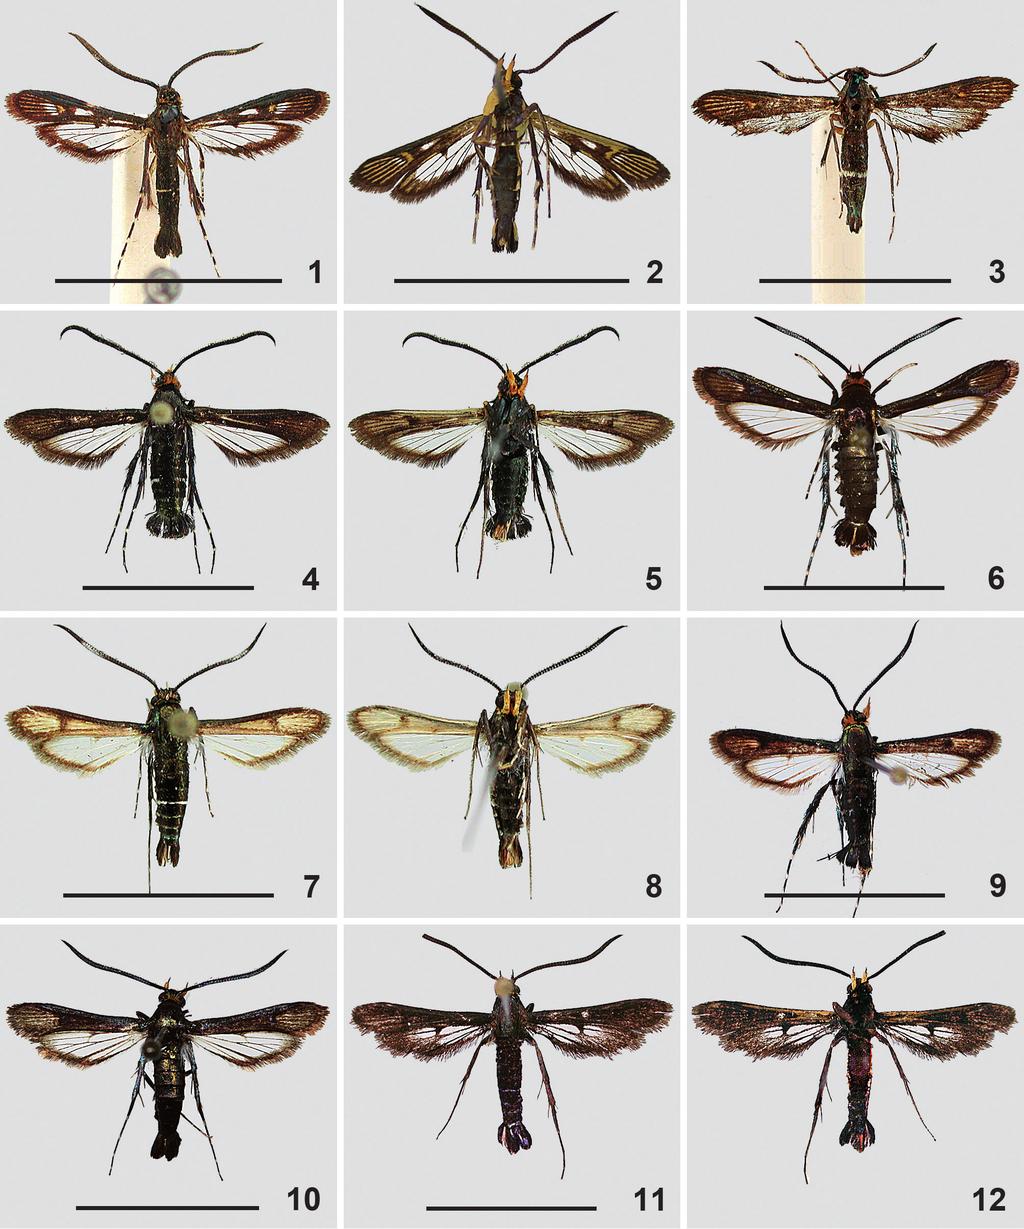 BARTSCH, REVISIONARY CHECKLIST OF THE SOUTHERN AFRICAN OSMINIINI 241 Figs. 1 12. Cabomina spp. 1 3. C. hilariformis n. comb. 1., Port Natal. 2. ventral view, South Africa, KwaZulu-Natal, Durban, Umlalo.